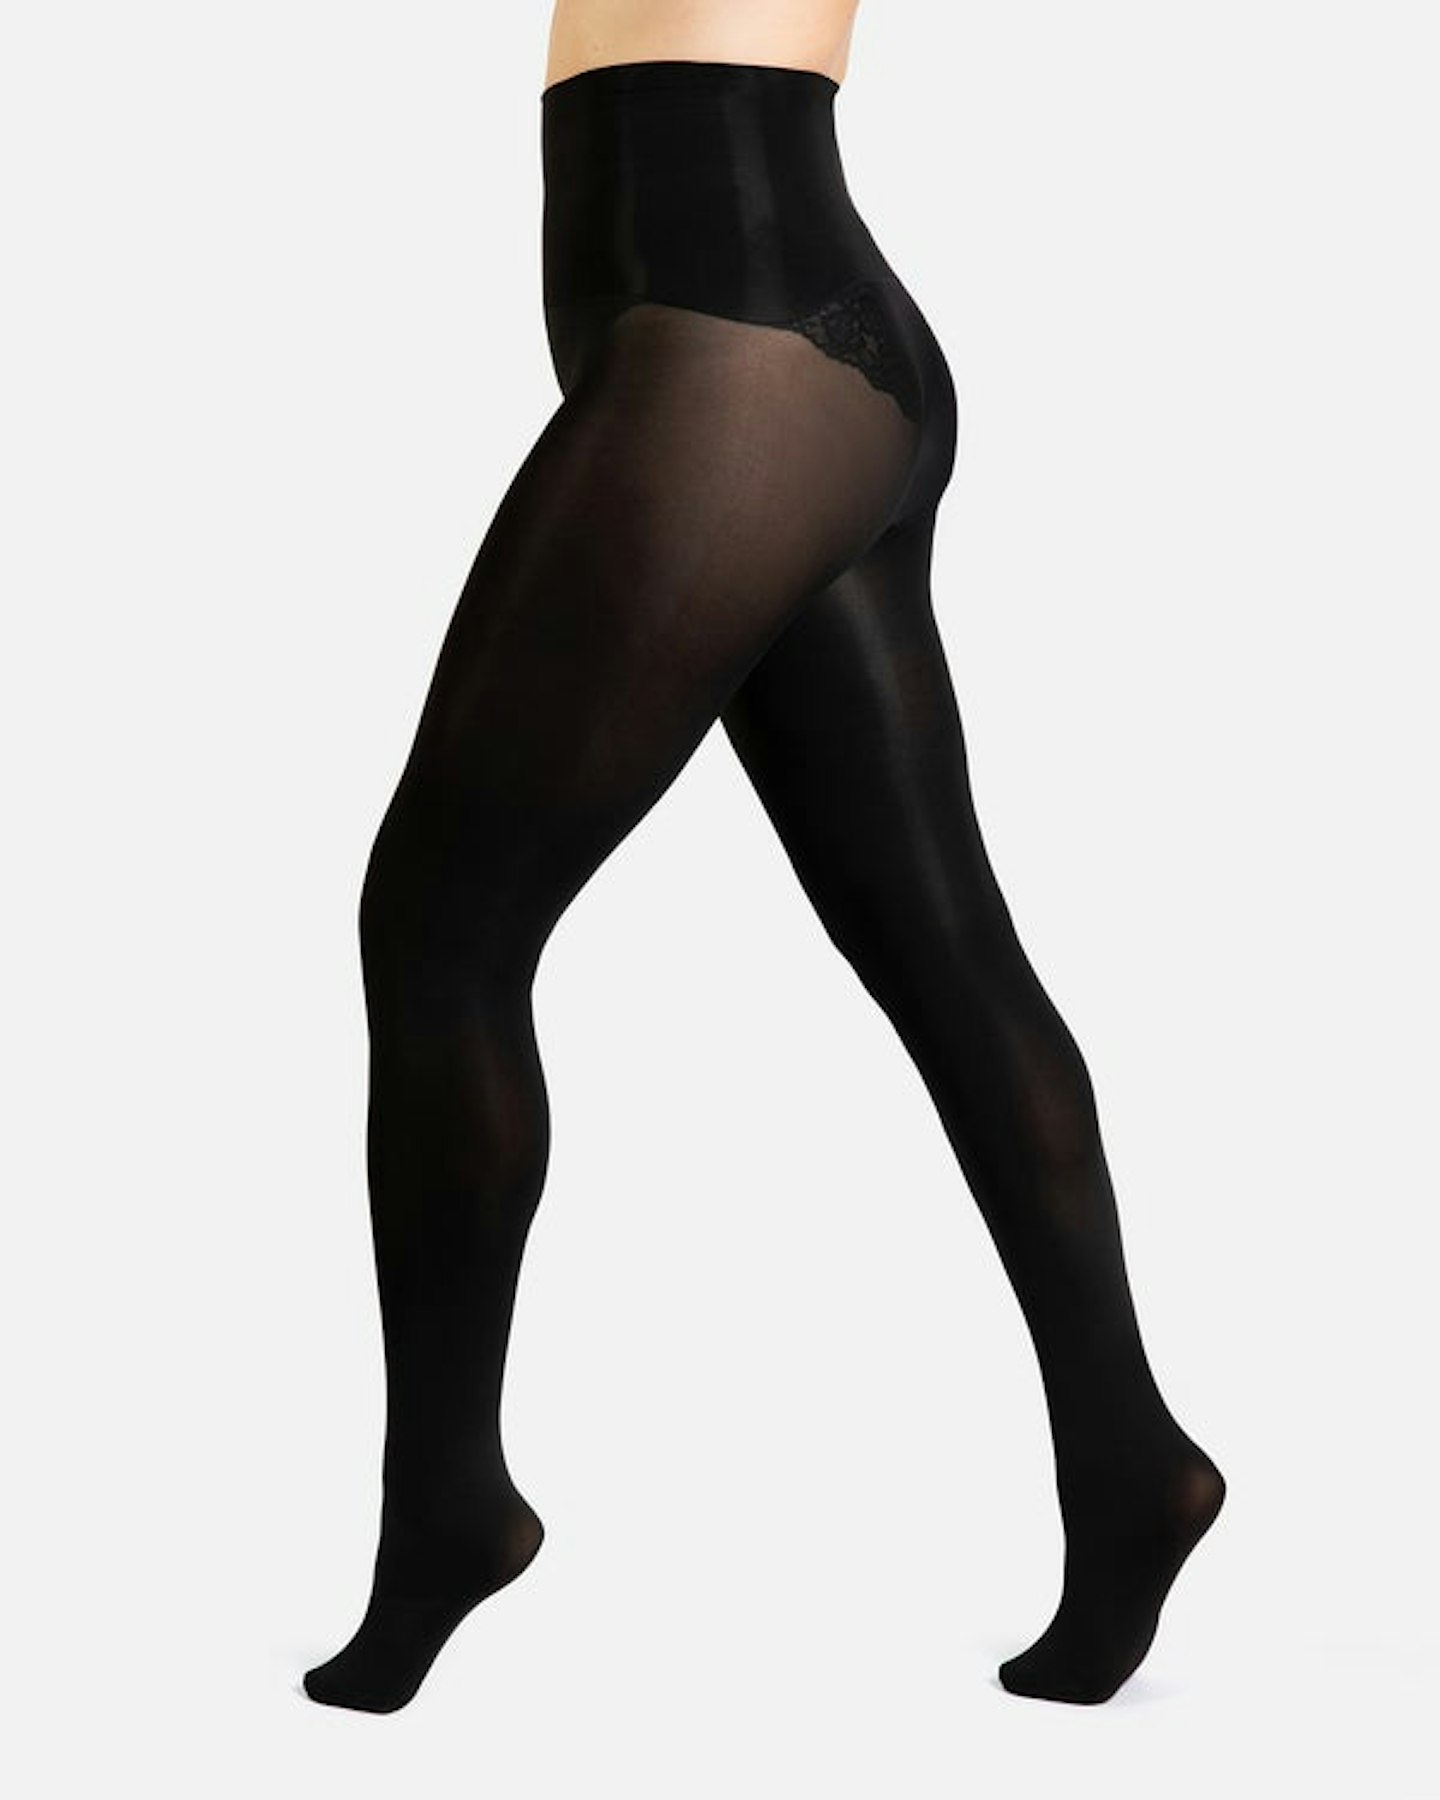 Tuesday – Hedoine, Biodegradable Tights, £30